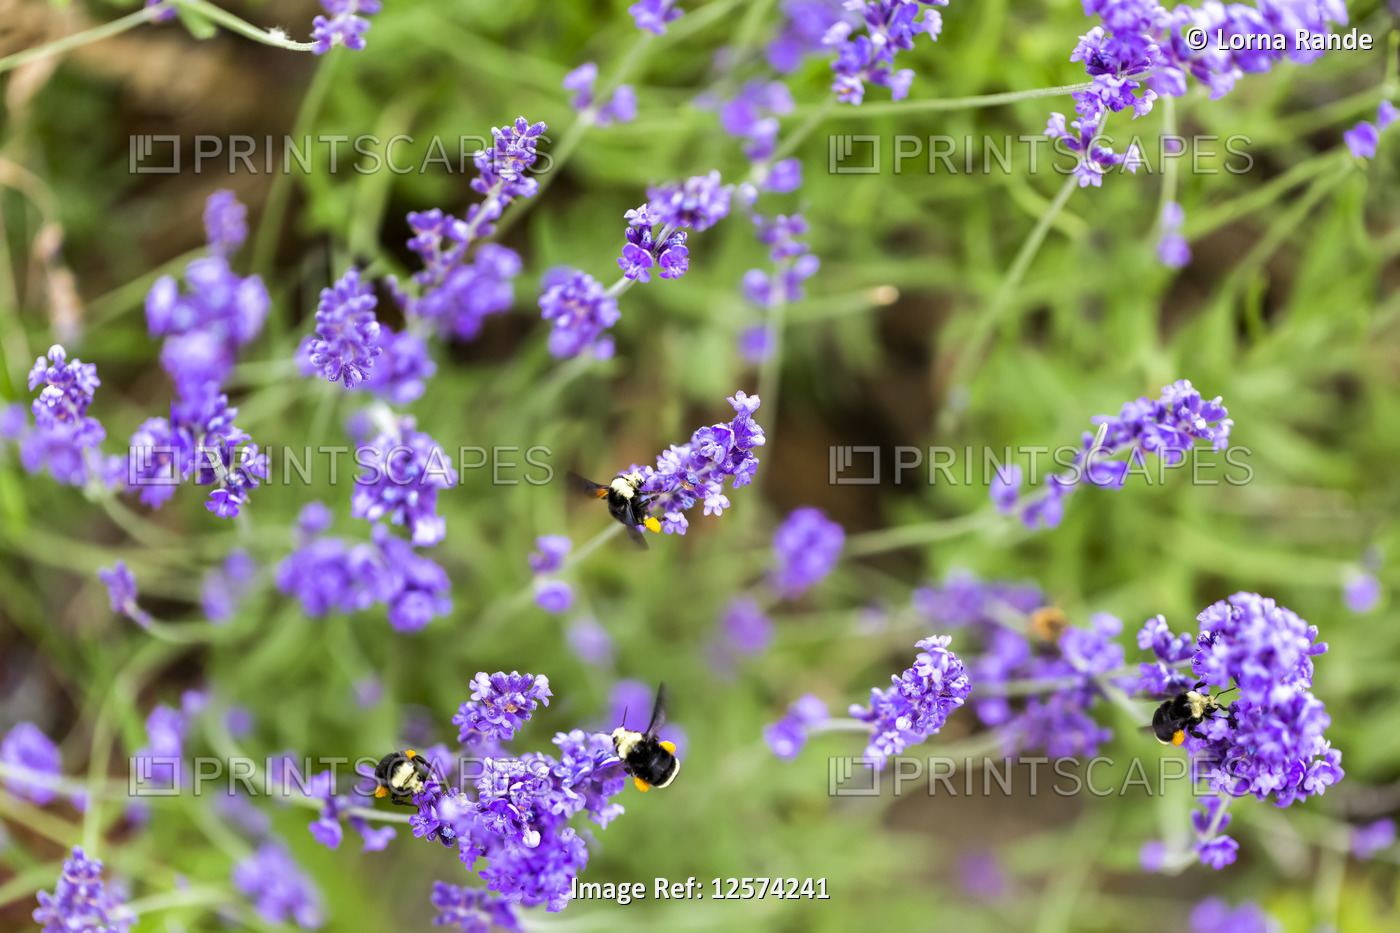 Bees on a blossoming plant, North Vancouver; Vancouver, British Columbia, Canada